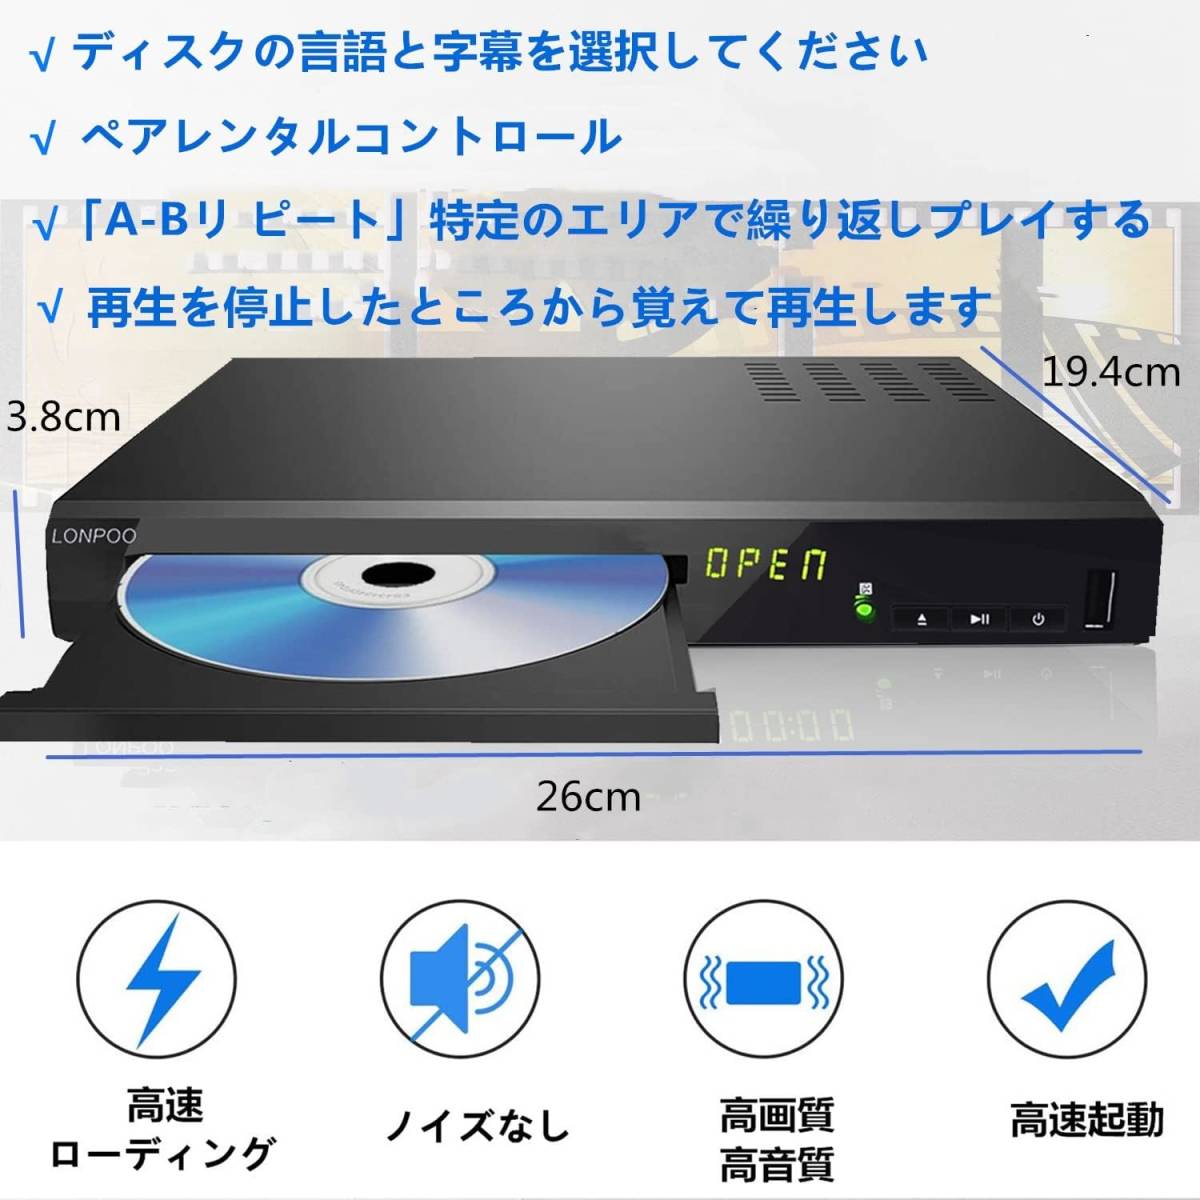  Blue-ray player full HD1080p DVD player CPRM is possible to reproduce HDMI/ same axis /AV output high speed start-up PAL/NTSC correspondence USB/ attached outside HDD correspondence 